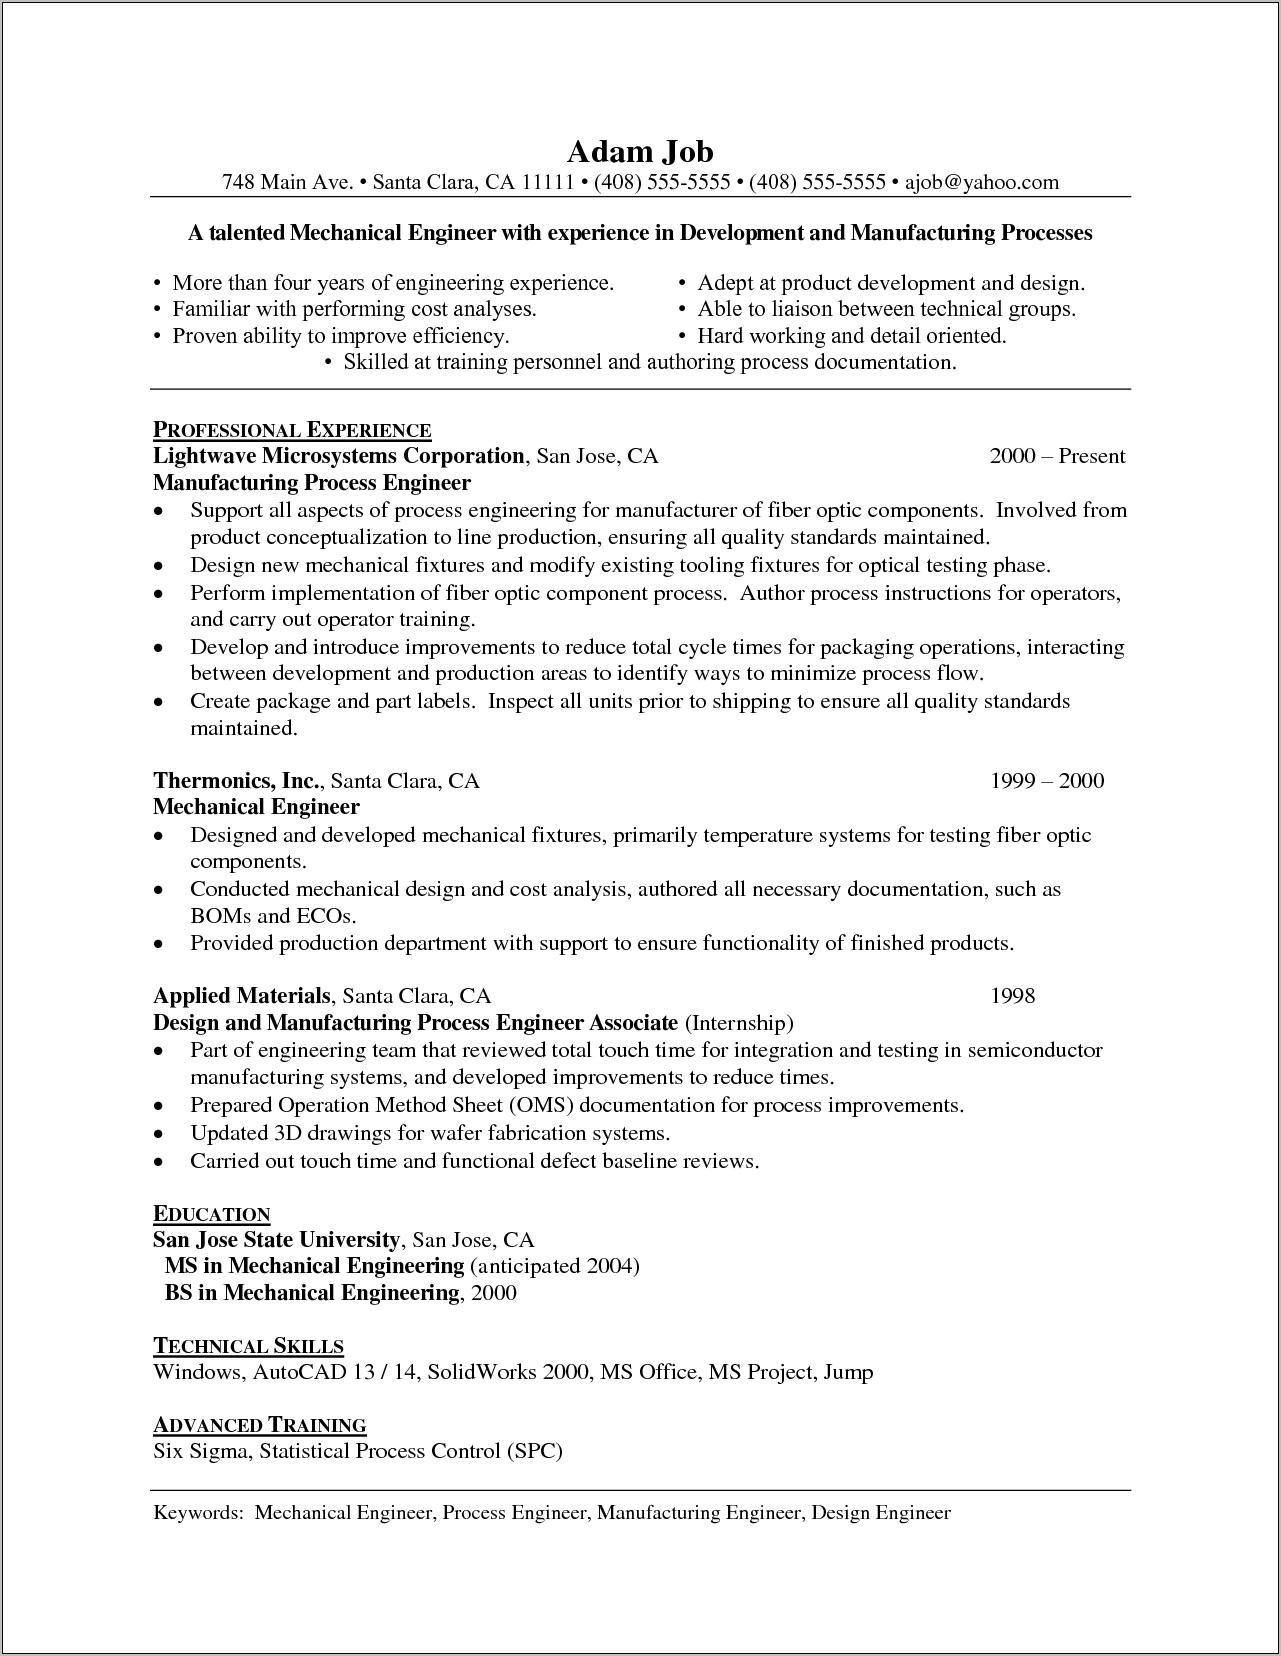 Resume Templates For Experienced Mechanical Engineers